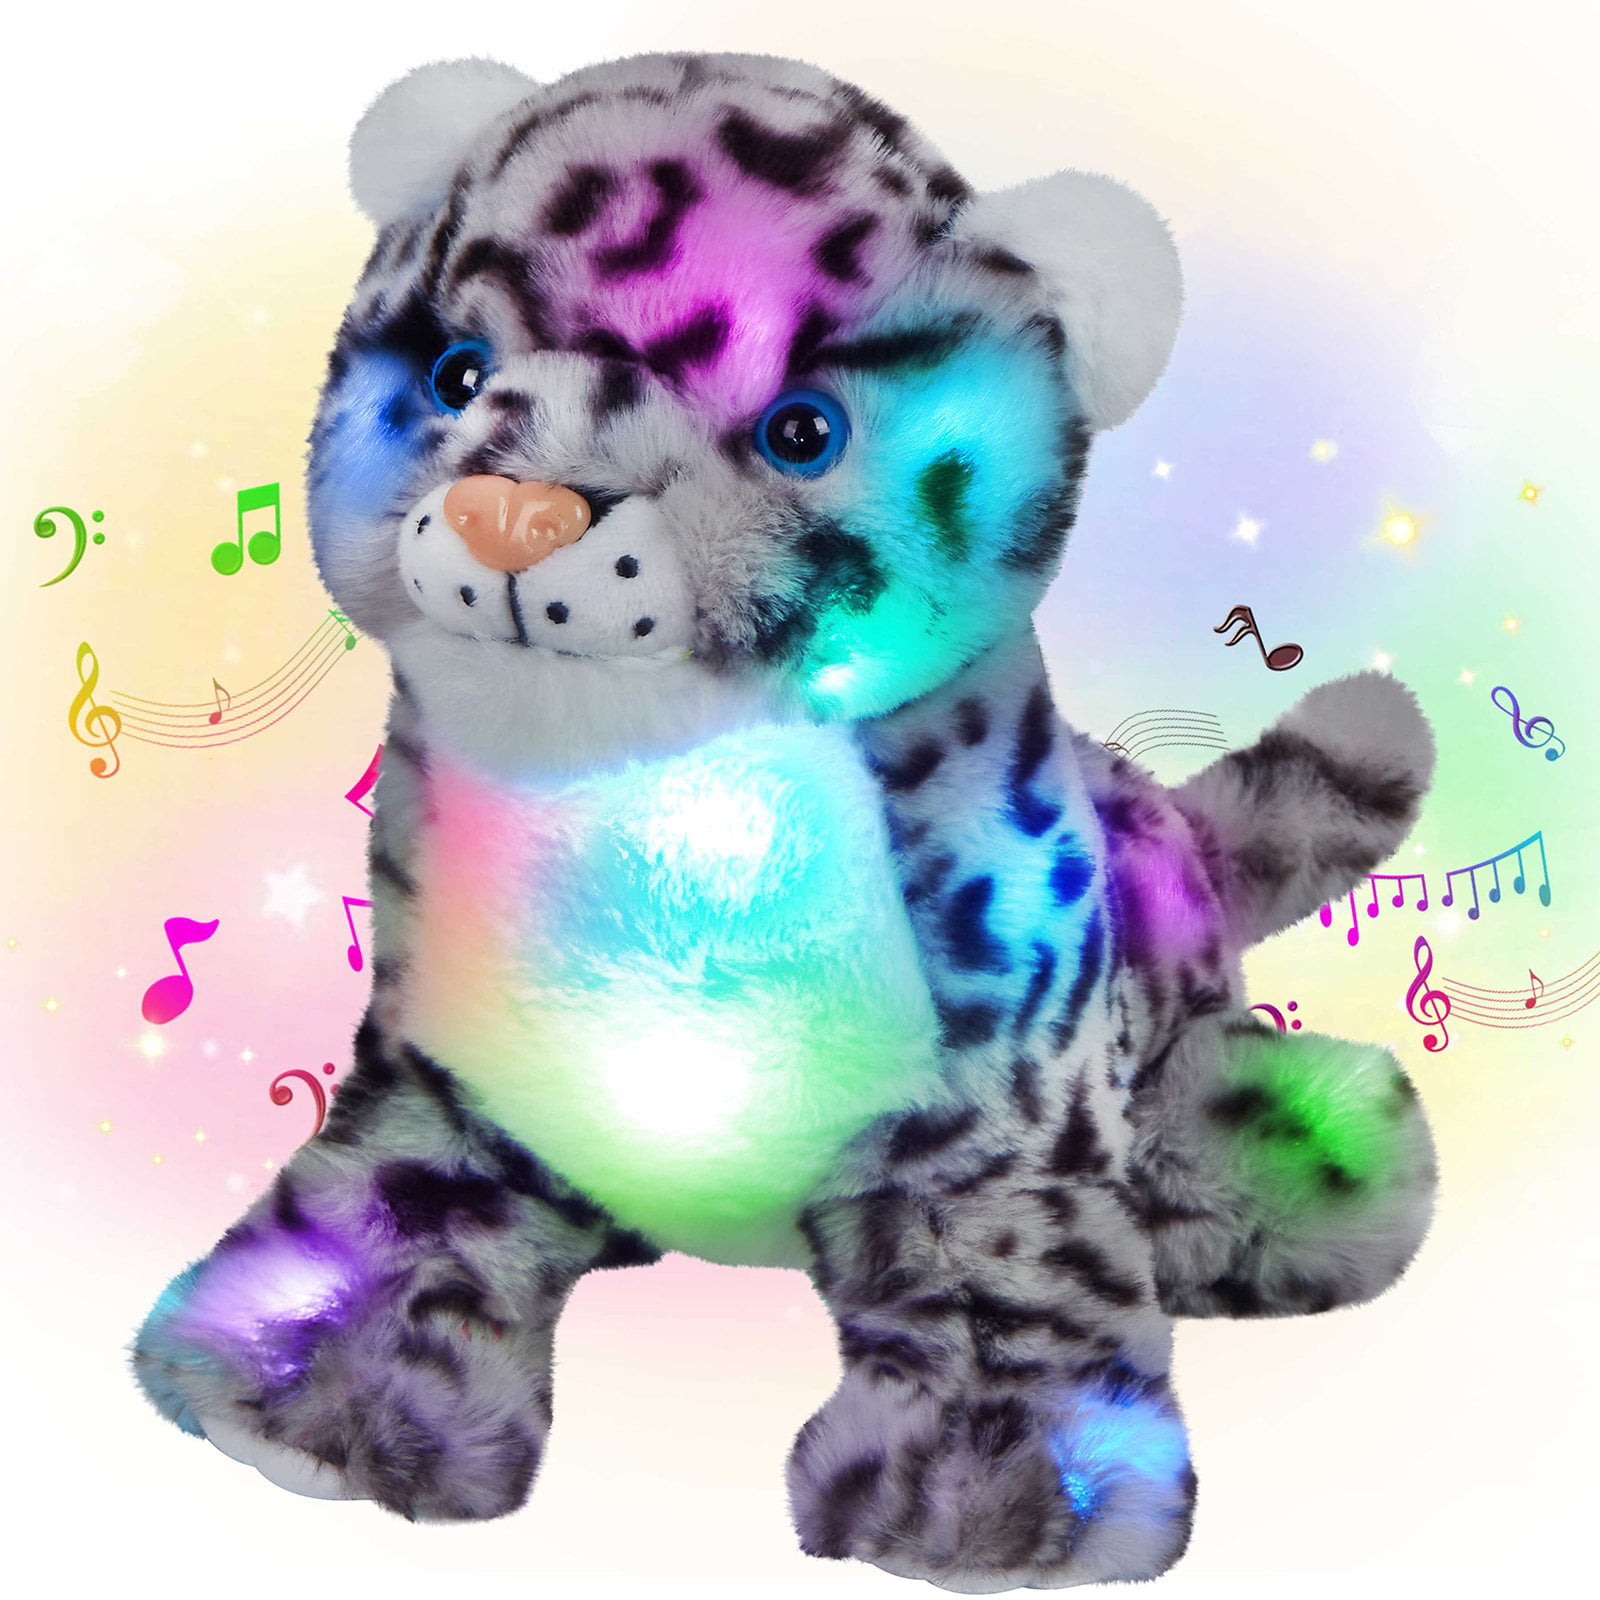 Stuffems Toy Shop SG_B01D4WHBSE_US Kit With Cute Backpack No Sew Make Your Own Stuffed Animal Charlie the Cheetah 16 